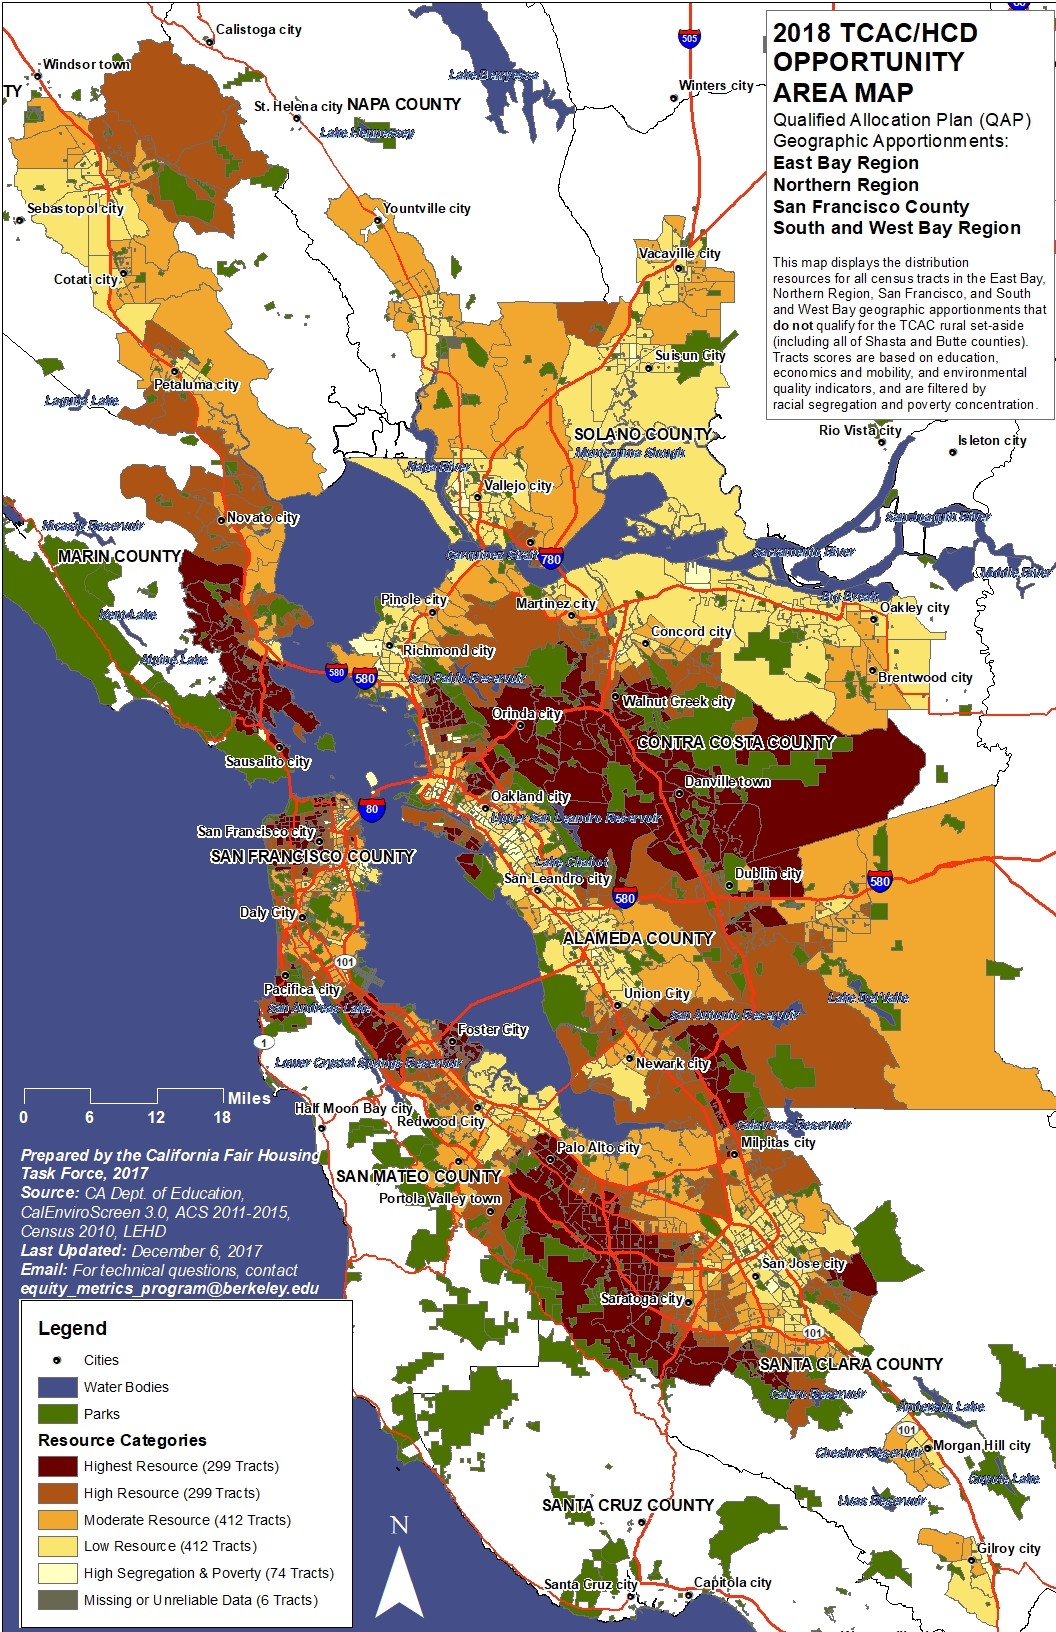 Image on California adopts 'opportunity maps' for future housing projects